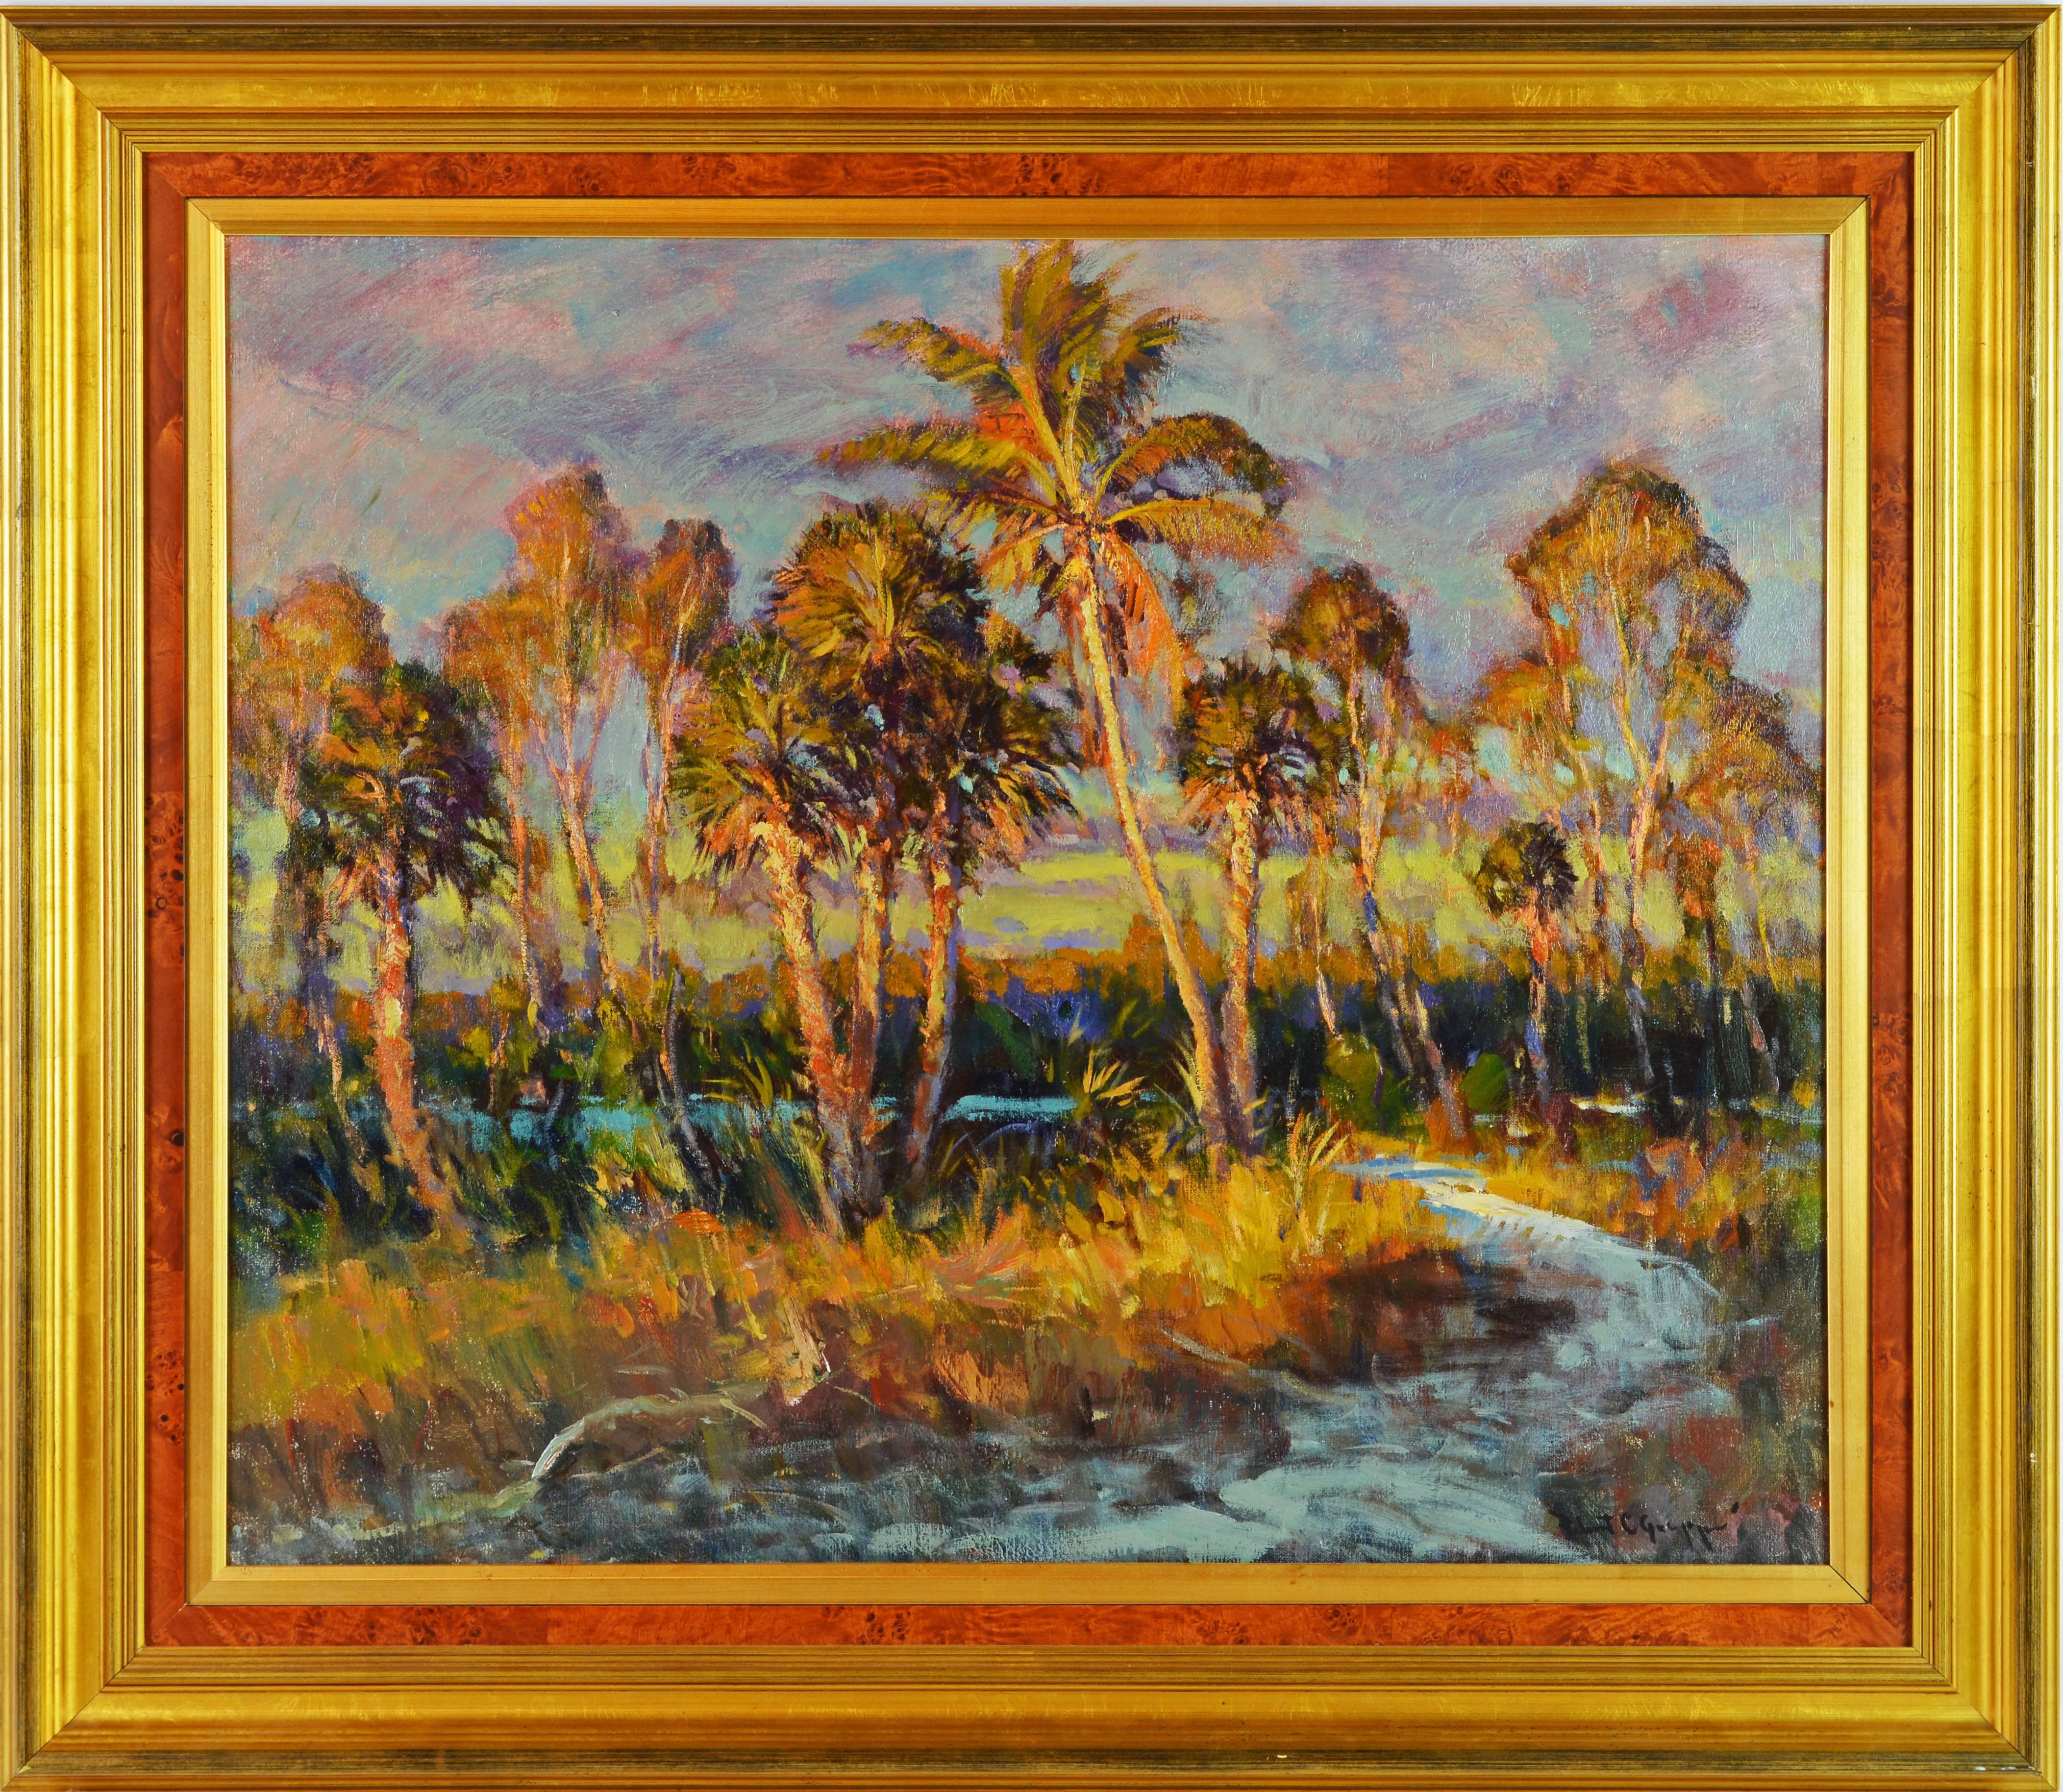 'Hurricane Pass'
By Robert C. Gruppe, American, b. 1944.
Measures: 30 x 36 inches with frame, 39.5 x 46 inches including frame.
Oil on canvas, signed.
Housed in a custom made vintage frame.

Robert Charles Gruppe:
Being third generation of